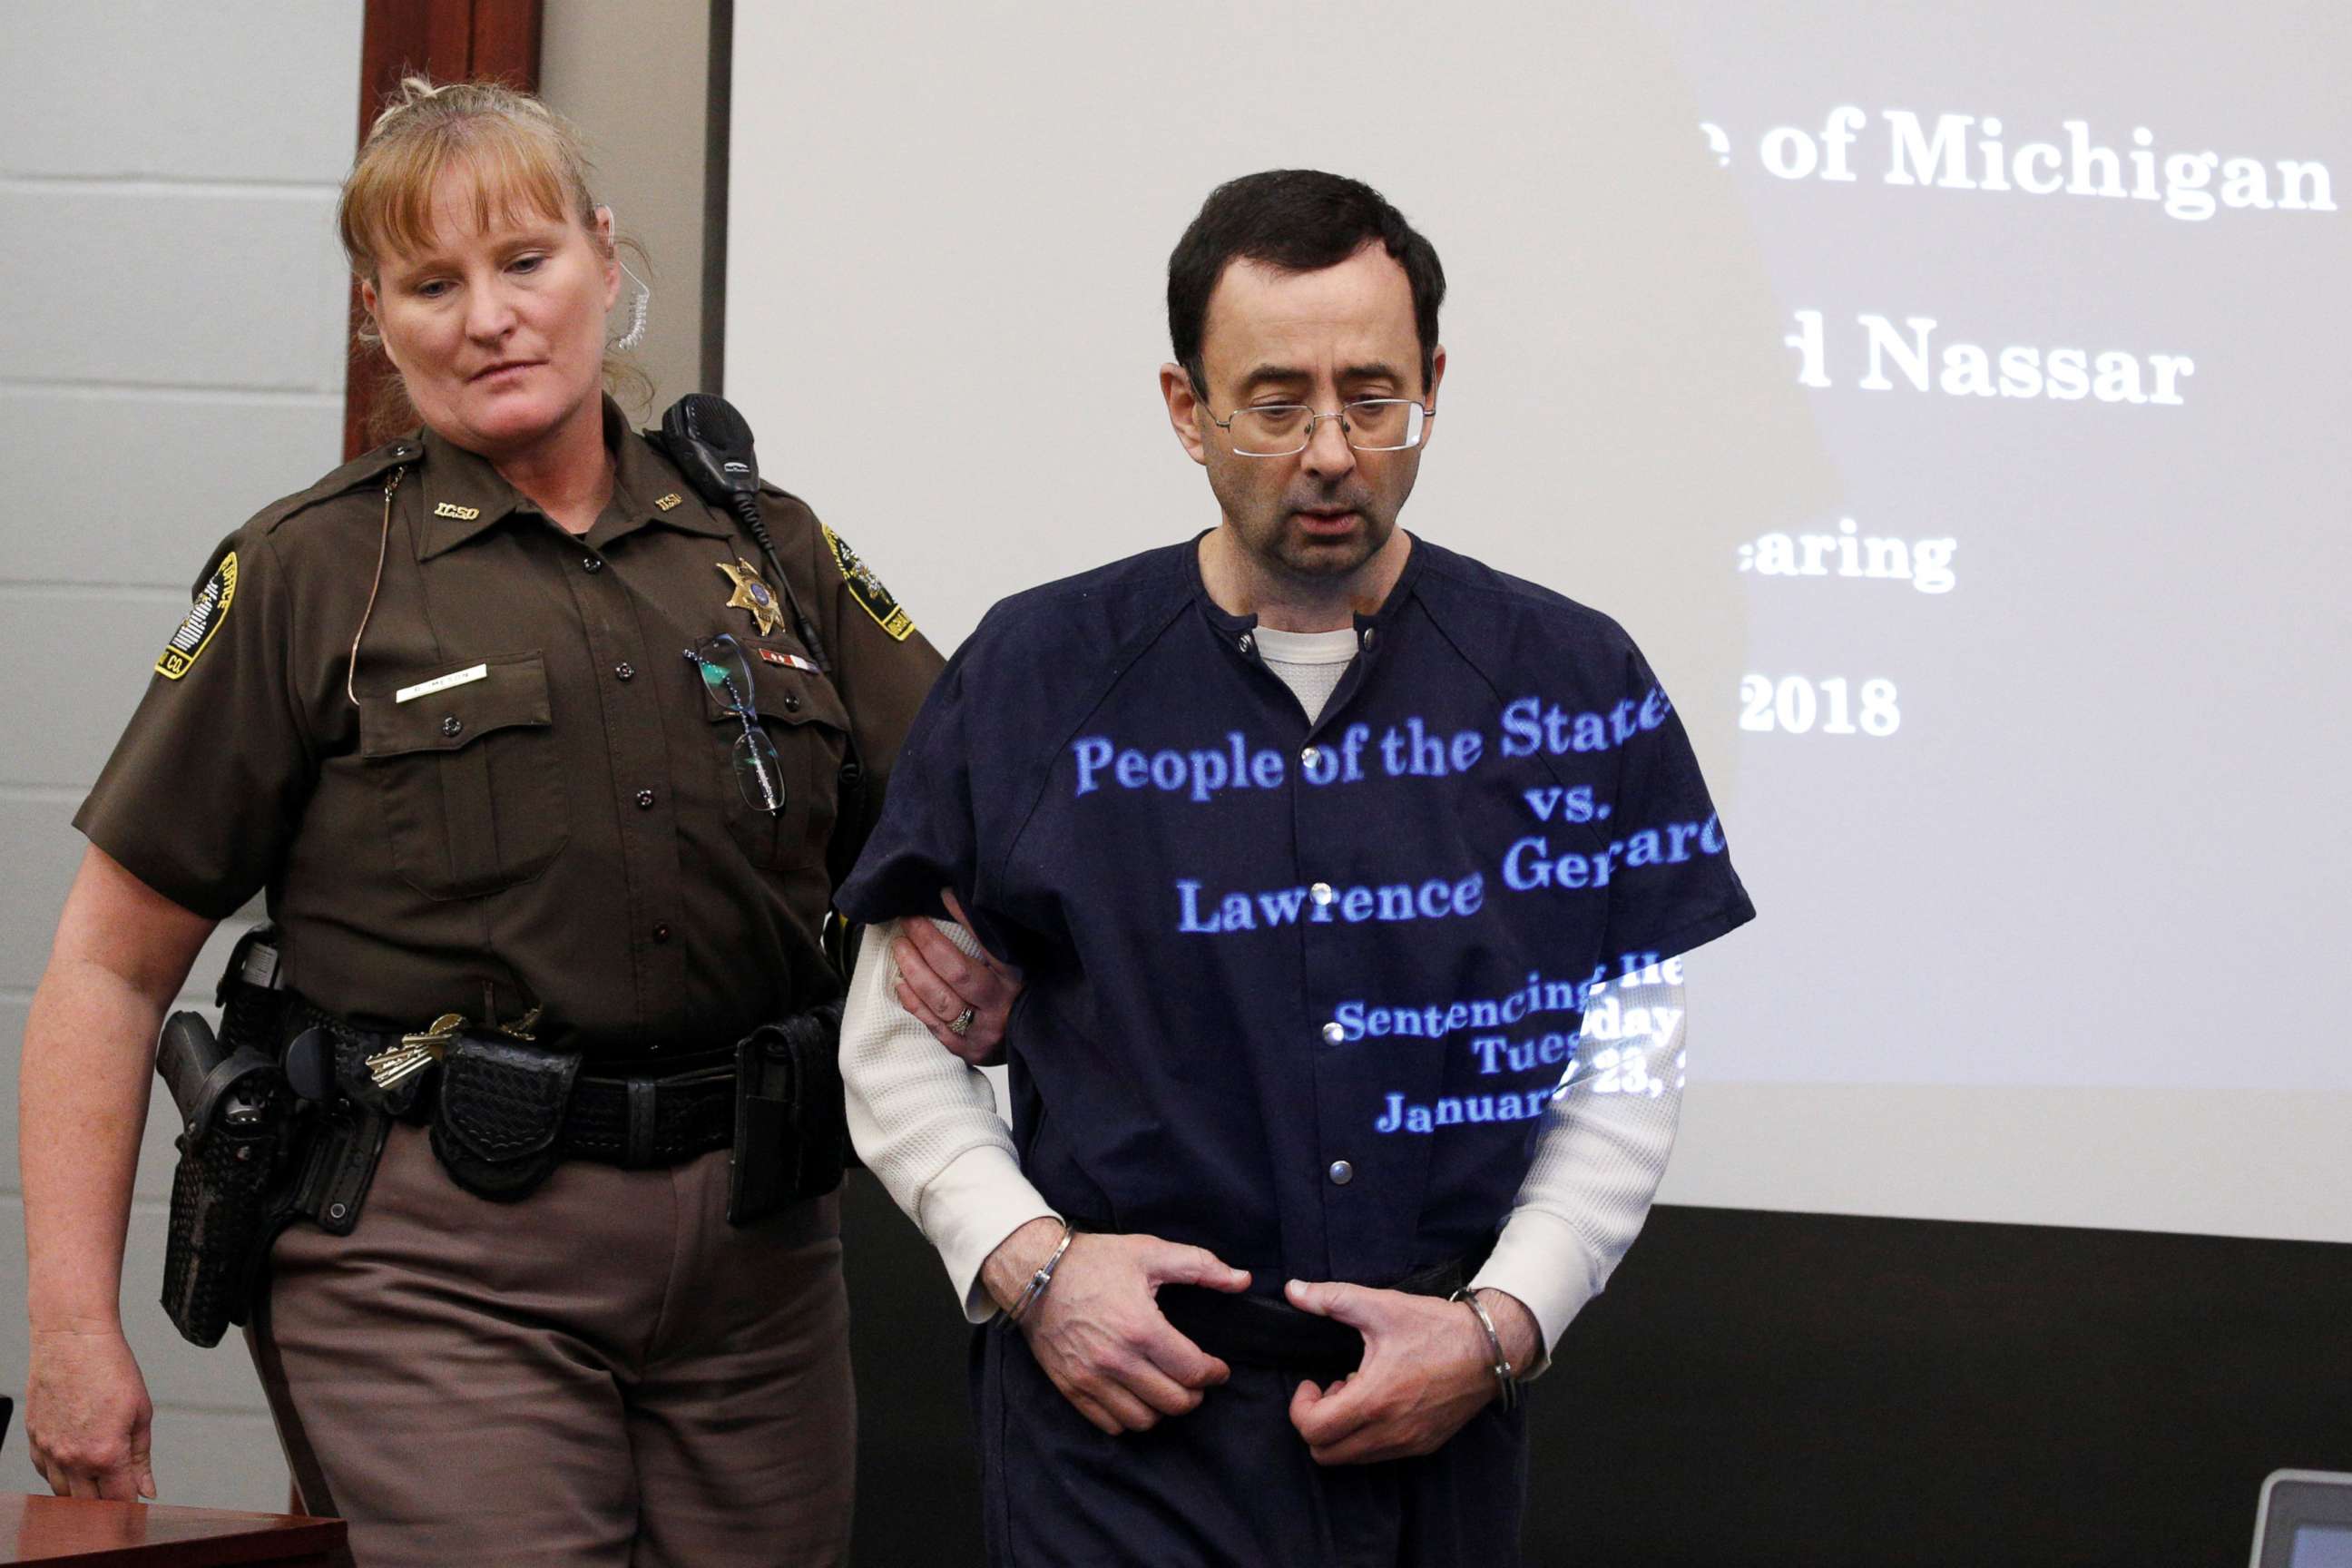 PHOTO: Larry Nassar, a former team USA Gymnastics doctor, who pleaded guilty in November 2017 to sexual assault charges, returns from a break to listen to victim testimony in the courtroom during his sentencing hearing in Lansing, Mich., Jan. 23, 2018.